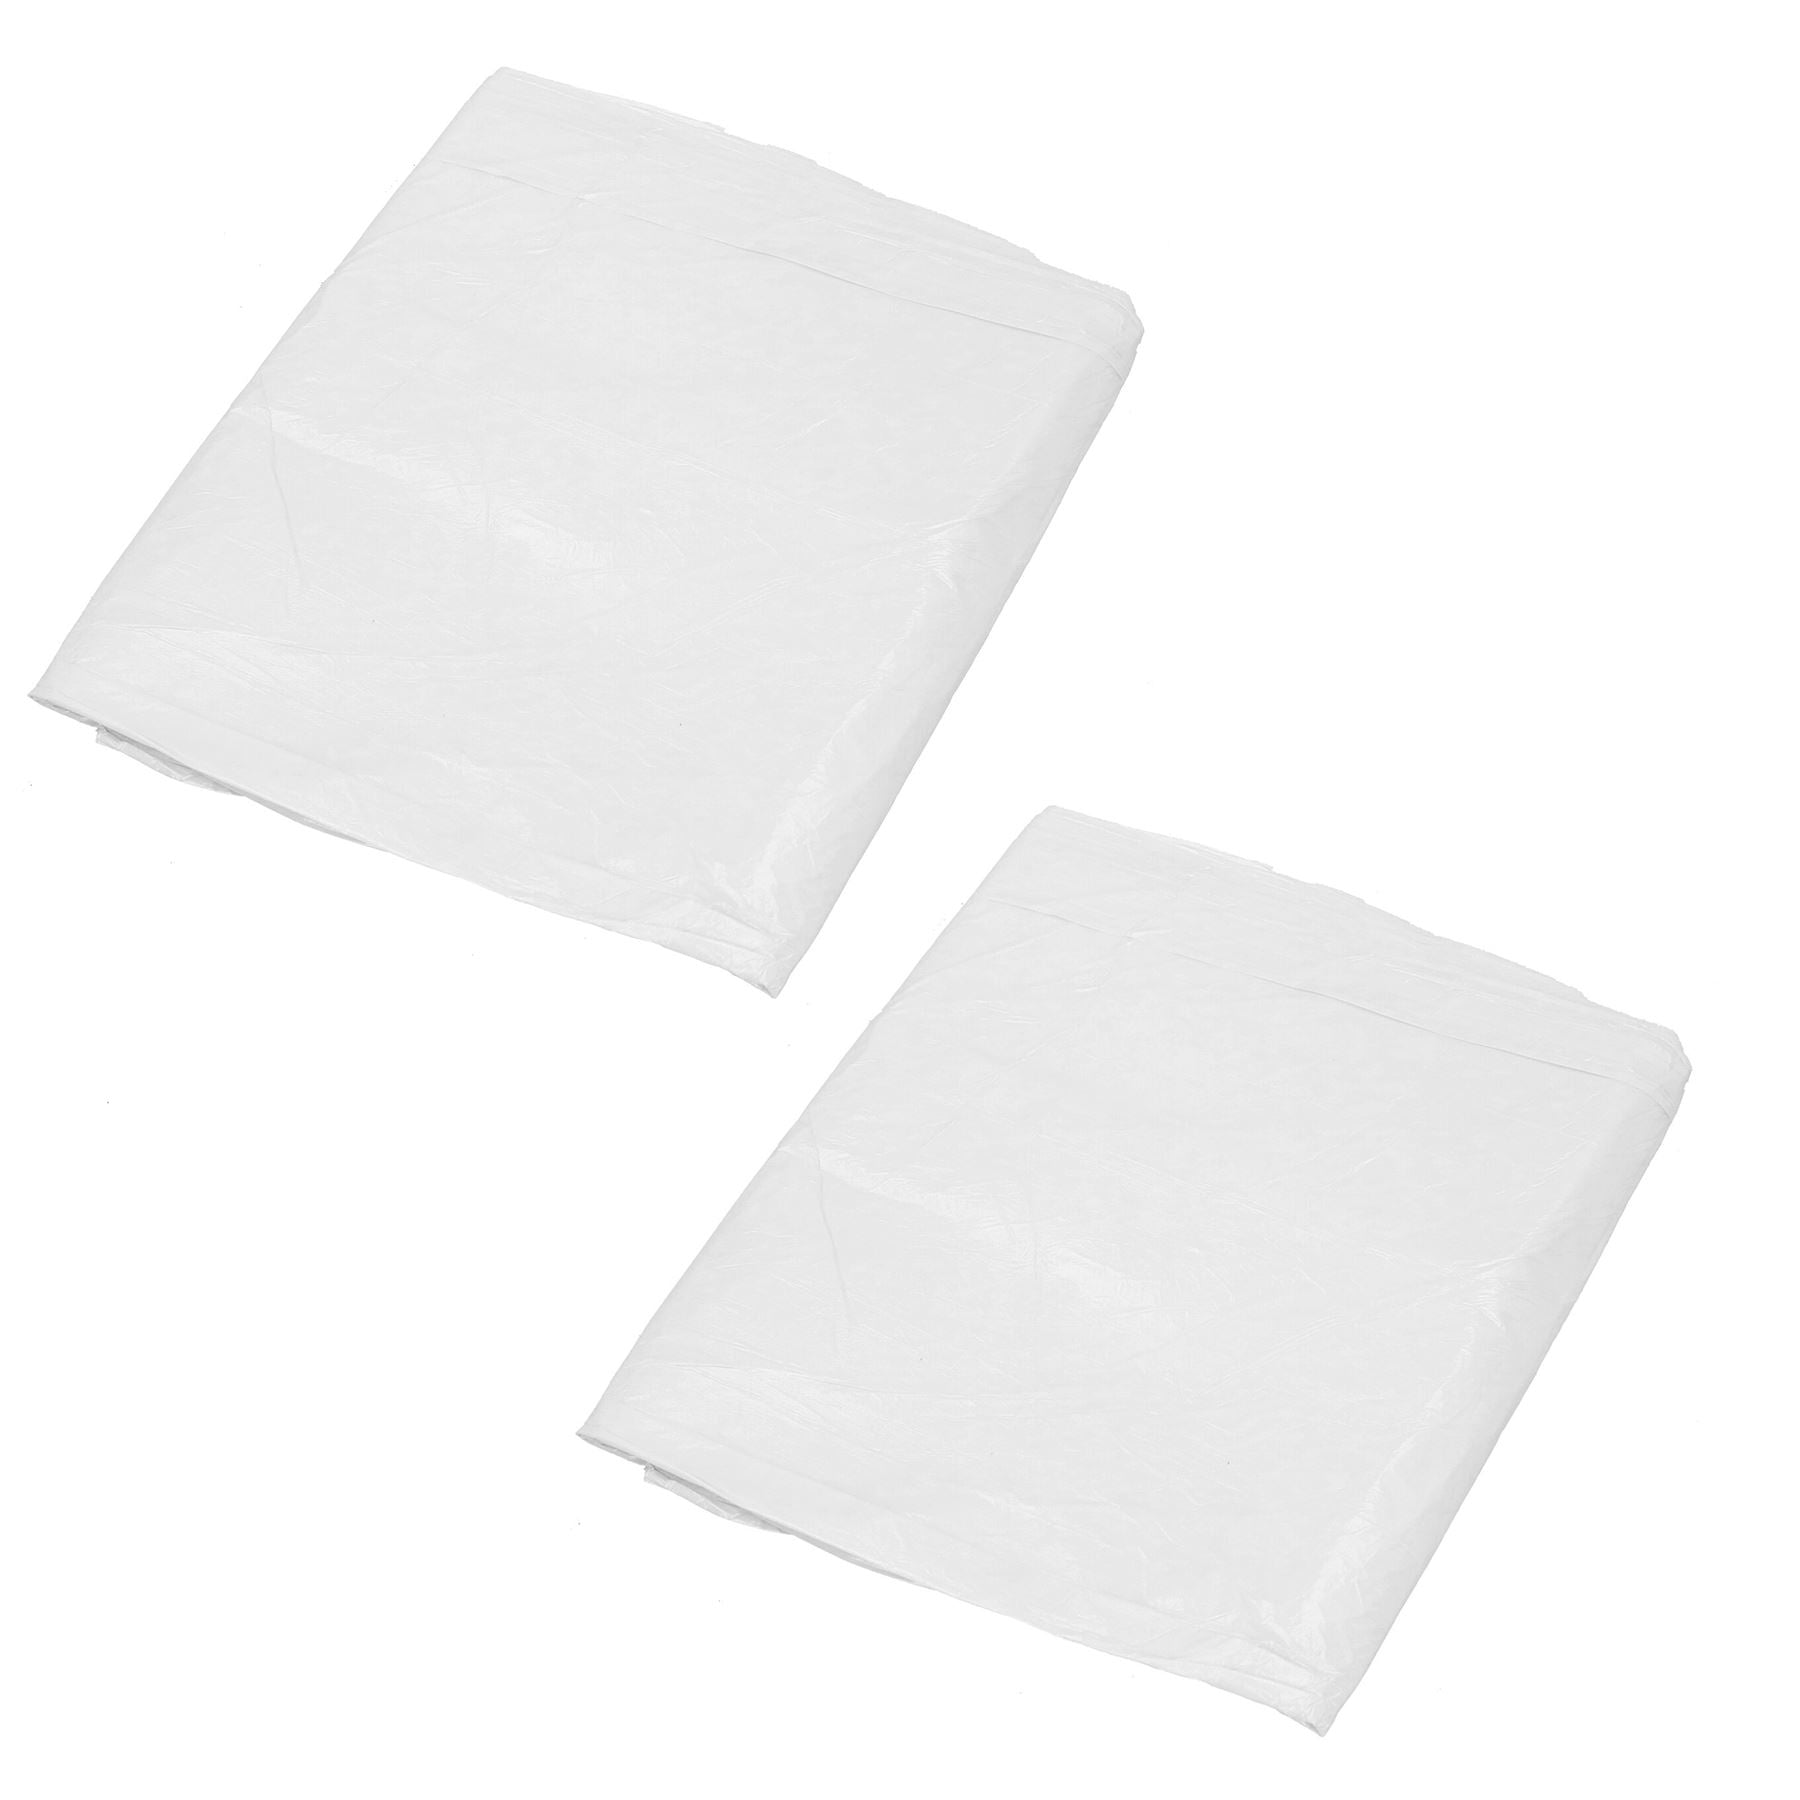 Polythene Dust Sheets Cover For Decorating Painting Waterproof 9ft x 12ft